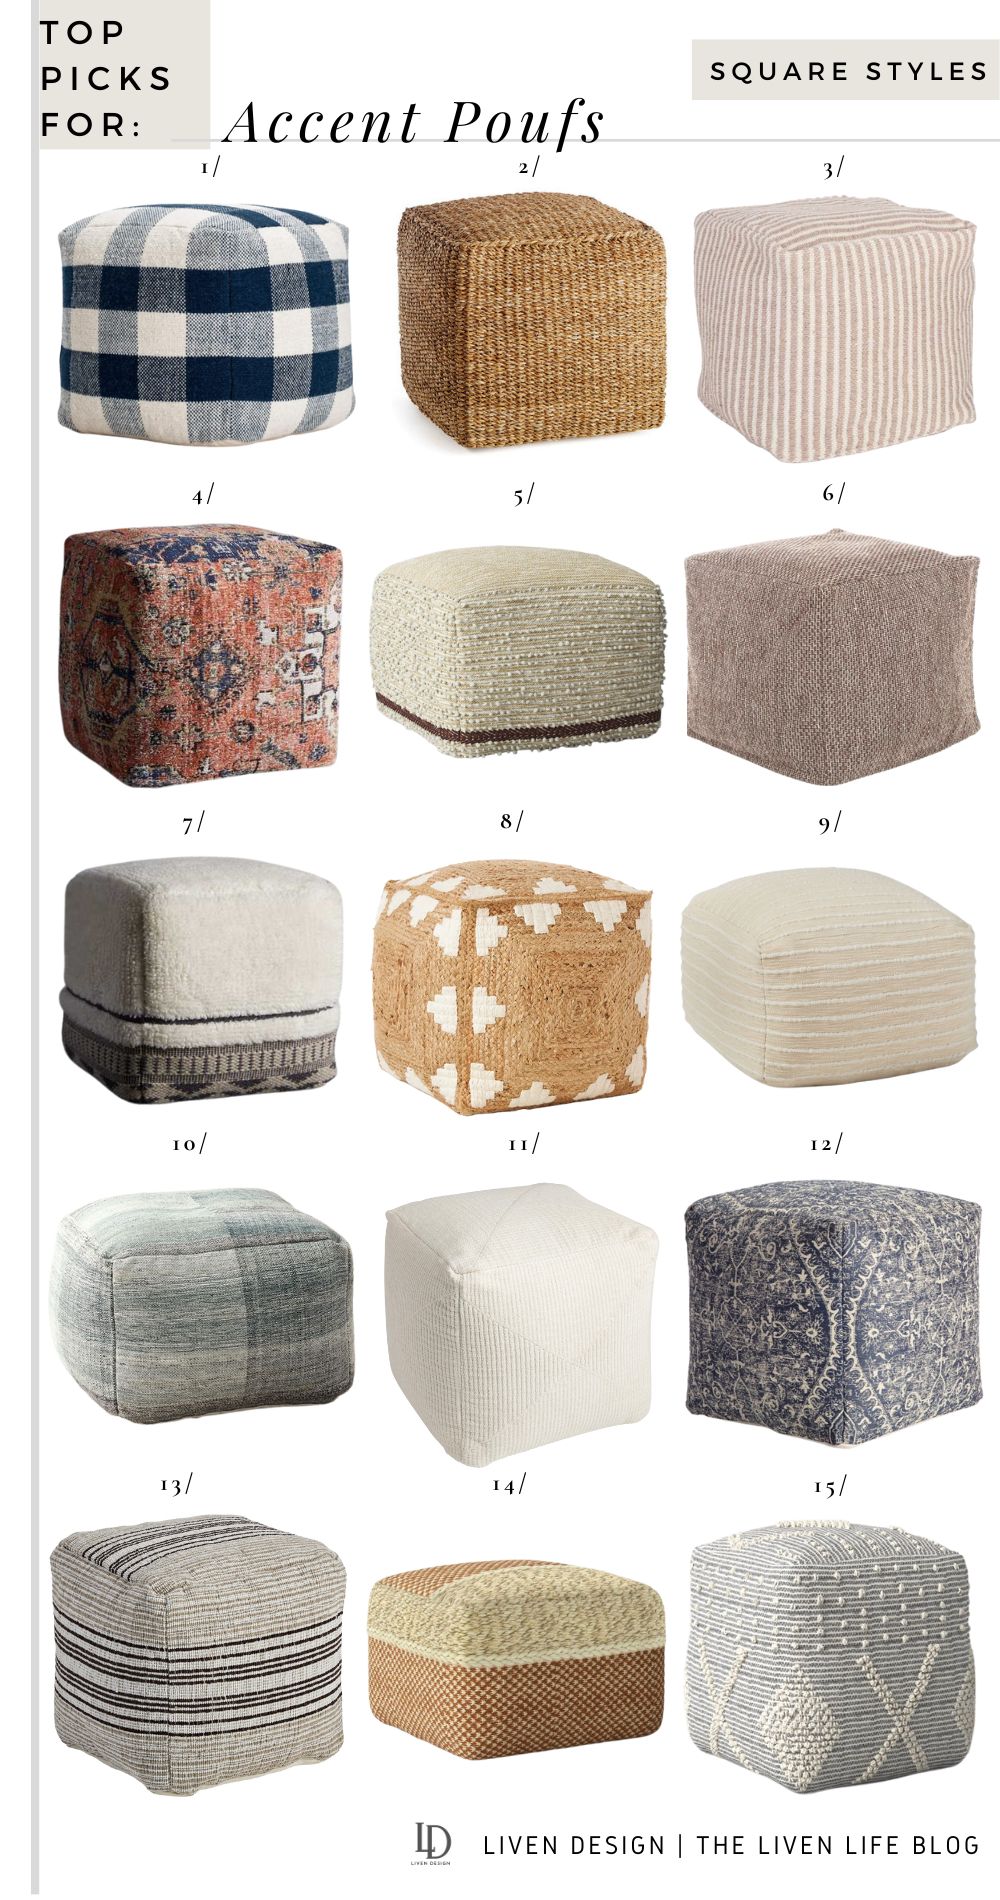 Stylish Pouf Ottomans For The Home — Liven Design Within Square Pouf Ottomans (View 12 of 15)